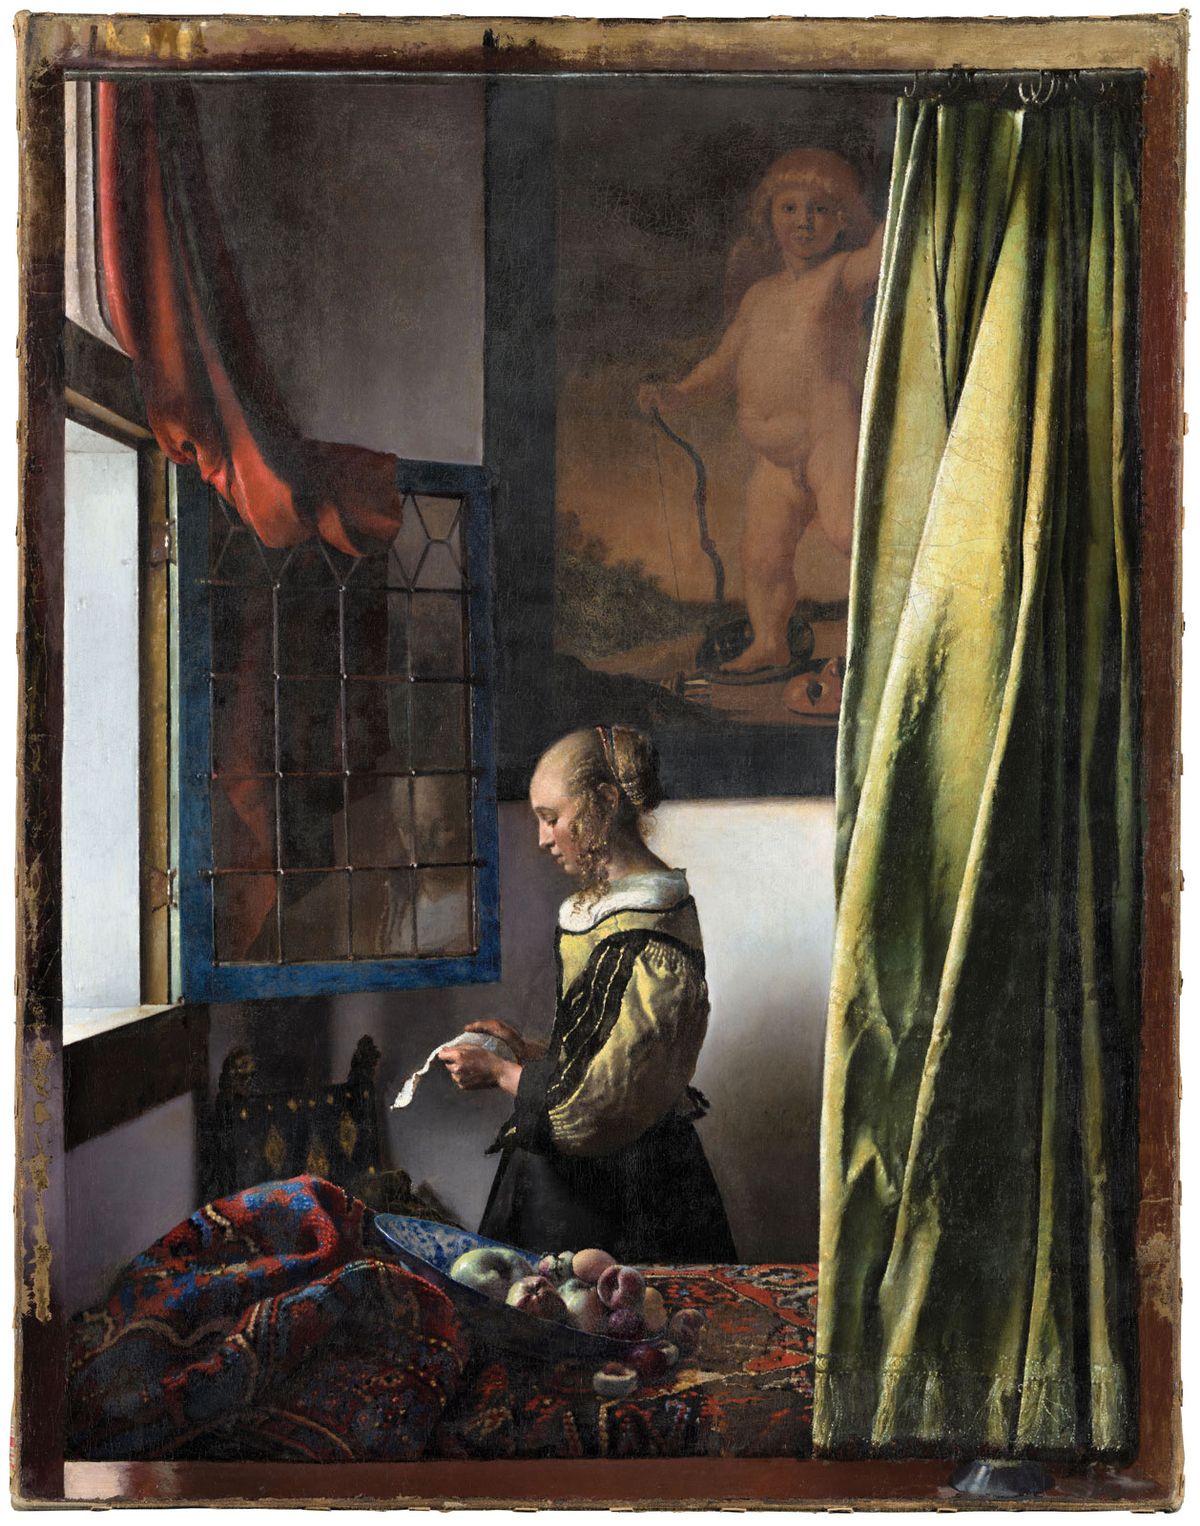 The newly restored Girl Reading a Letter at an Open Window (around 1657-59) by Johannes Vermeer © Gemäldegalerie Alte Meister, SKD, Photo: Wolfgang Kreische